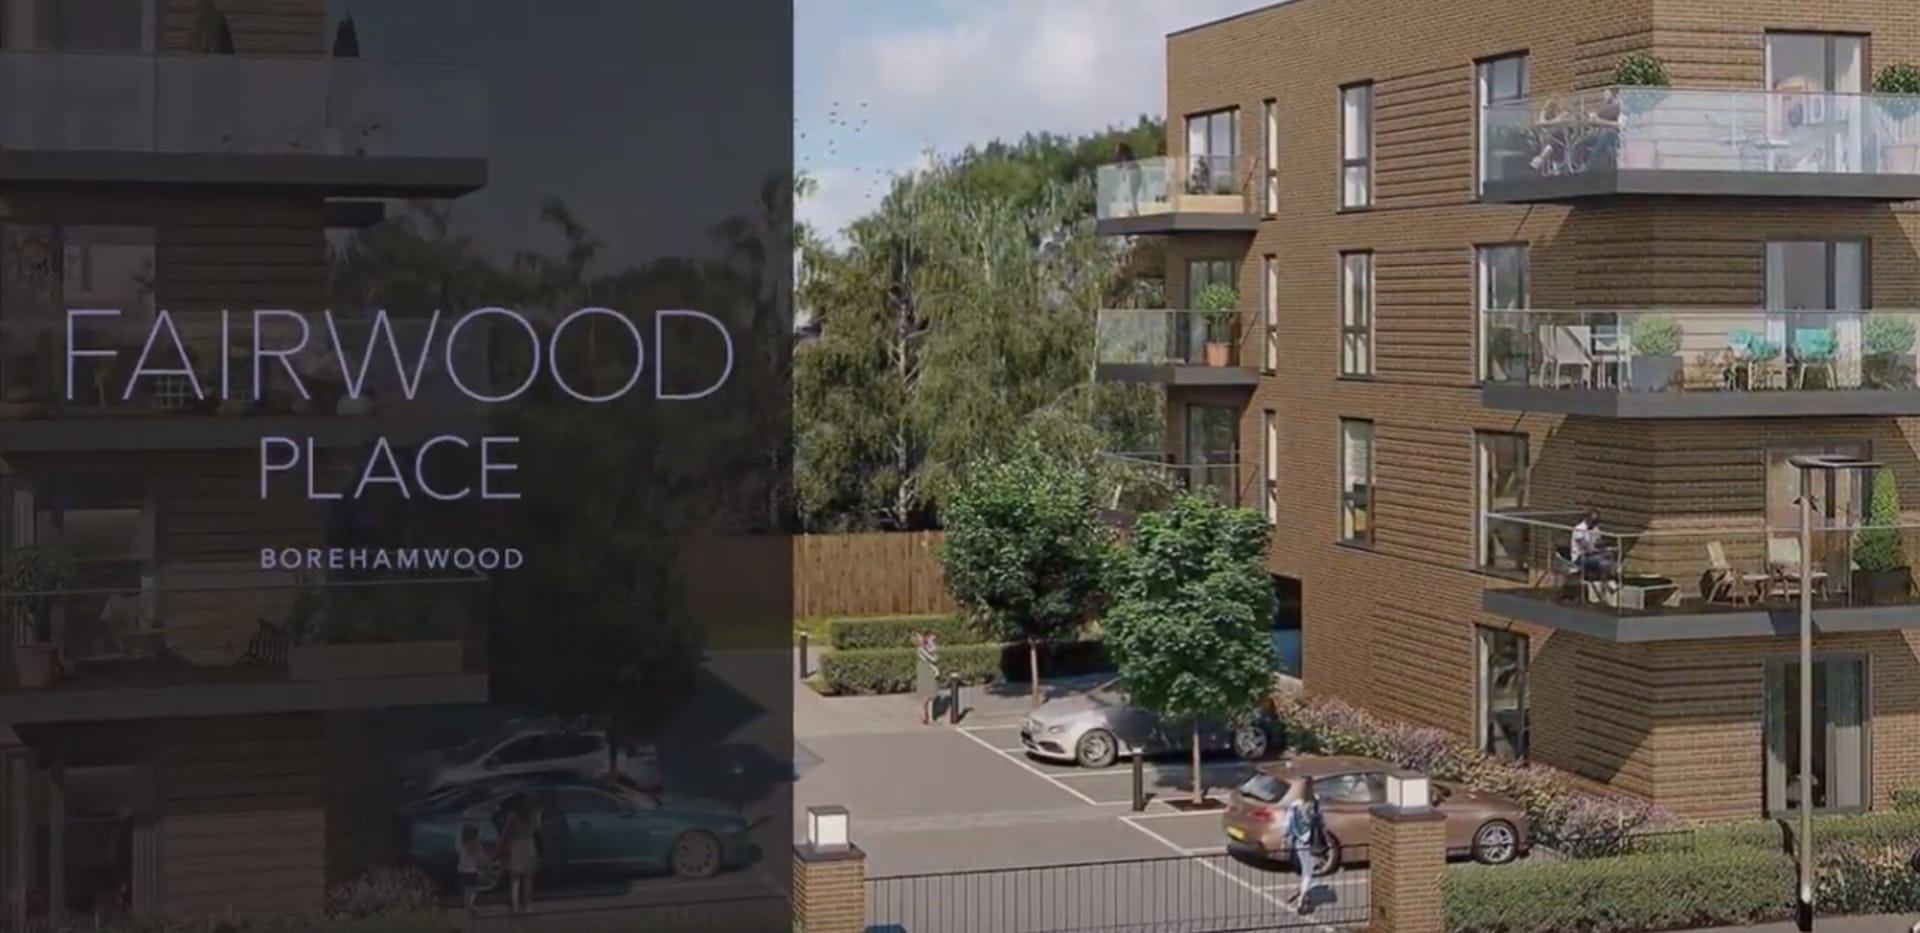 St William, Fairwood Place Discover Video